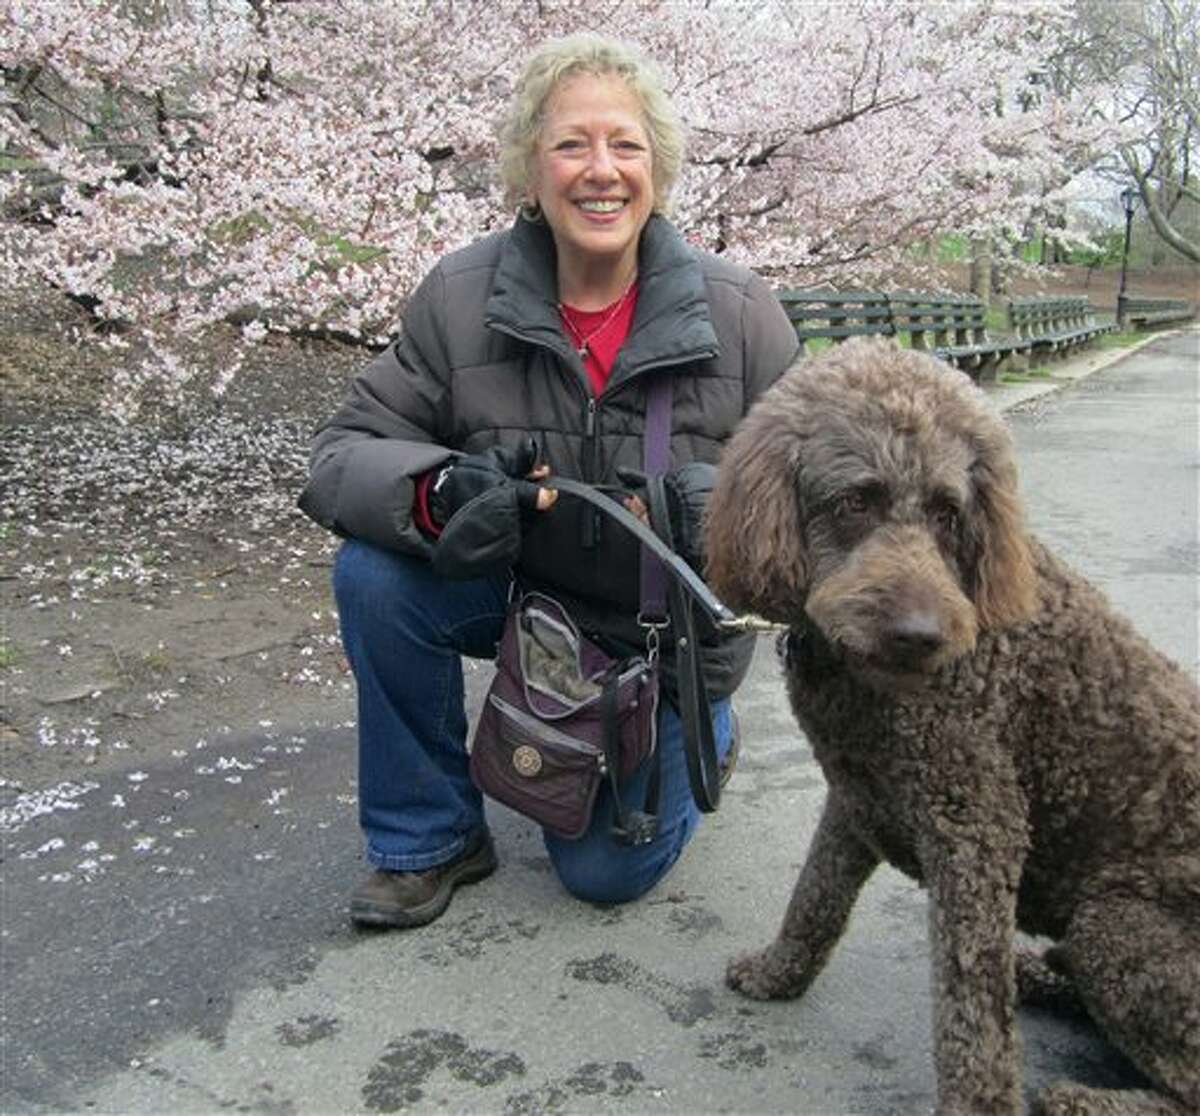 In this April 2014 photo provided by B.L. Ochman, Ochman poses with dog Benny, an 80-pound labradoodle in New York's Central Park. Hotels ranging from major chains to small outposts are capitalizing on the wave of travelers who bring their dogs, some by charging for perks that pamper pets and others by expanding fees.